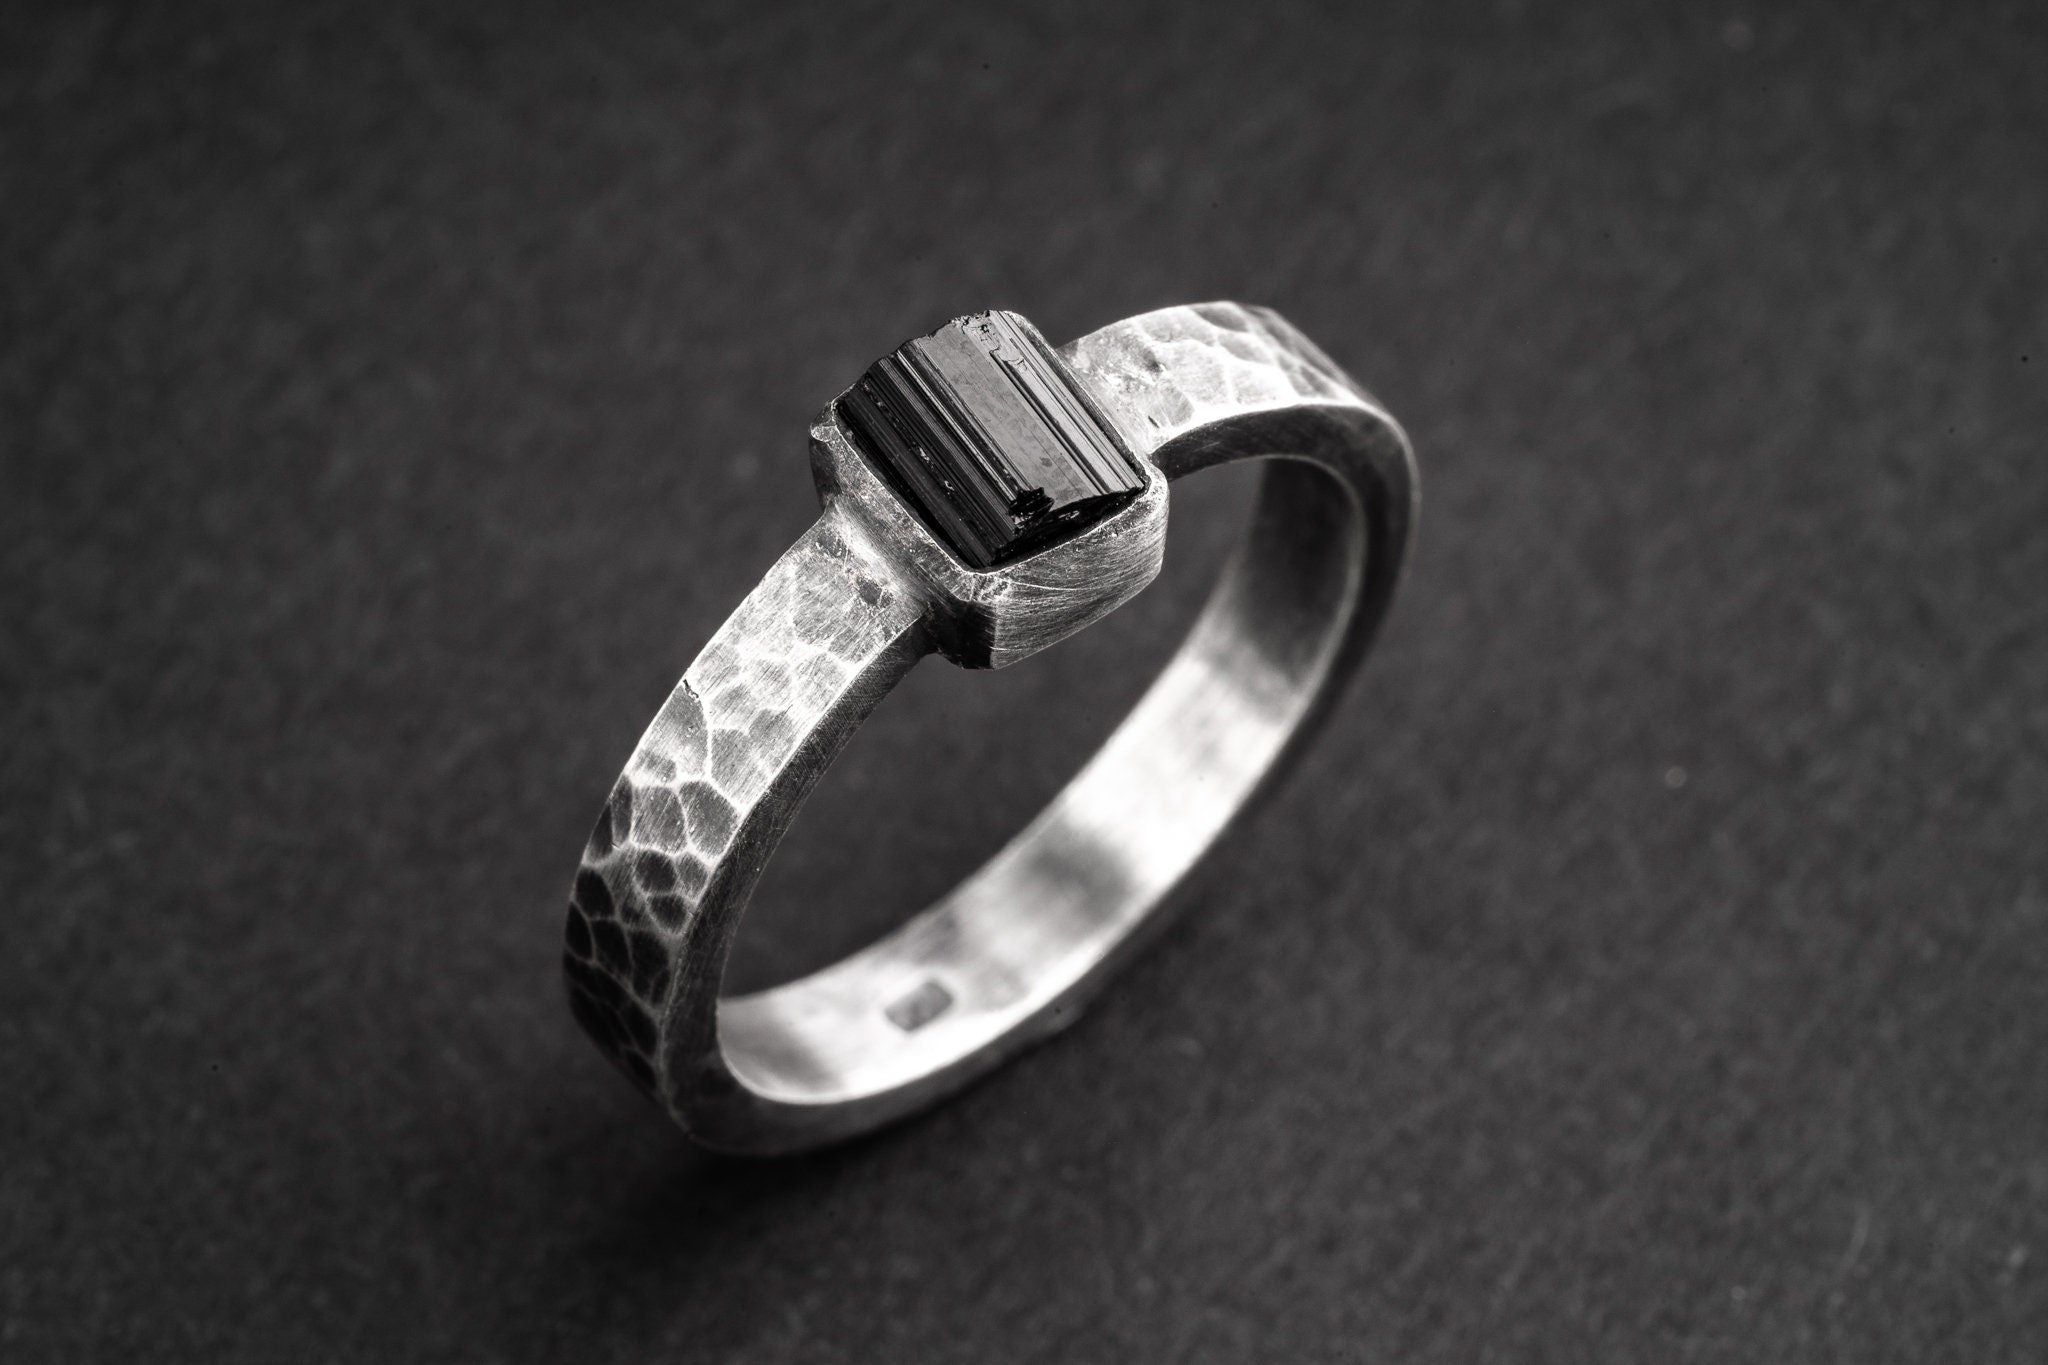 Raw Black Tourmaline - Mens Ring / Jewellery - Size 11 US - Sterling Silver - Hammer Textured Oxidised No12